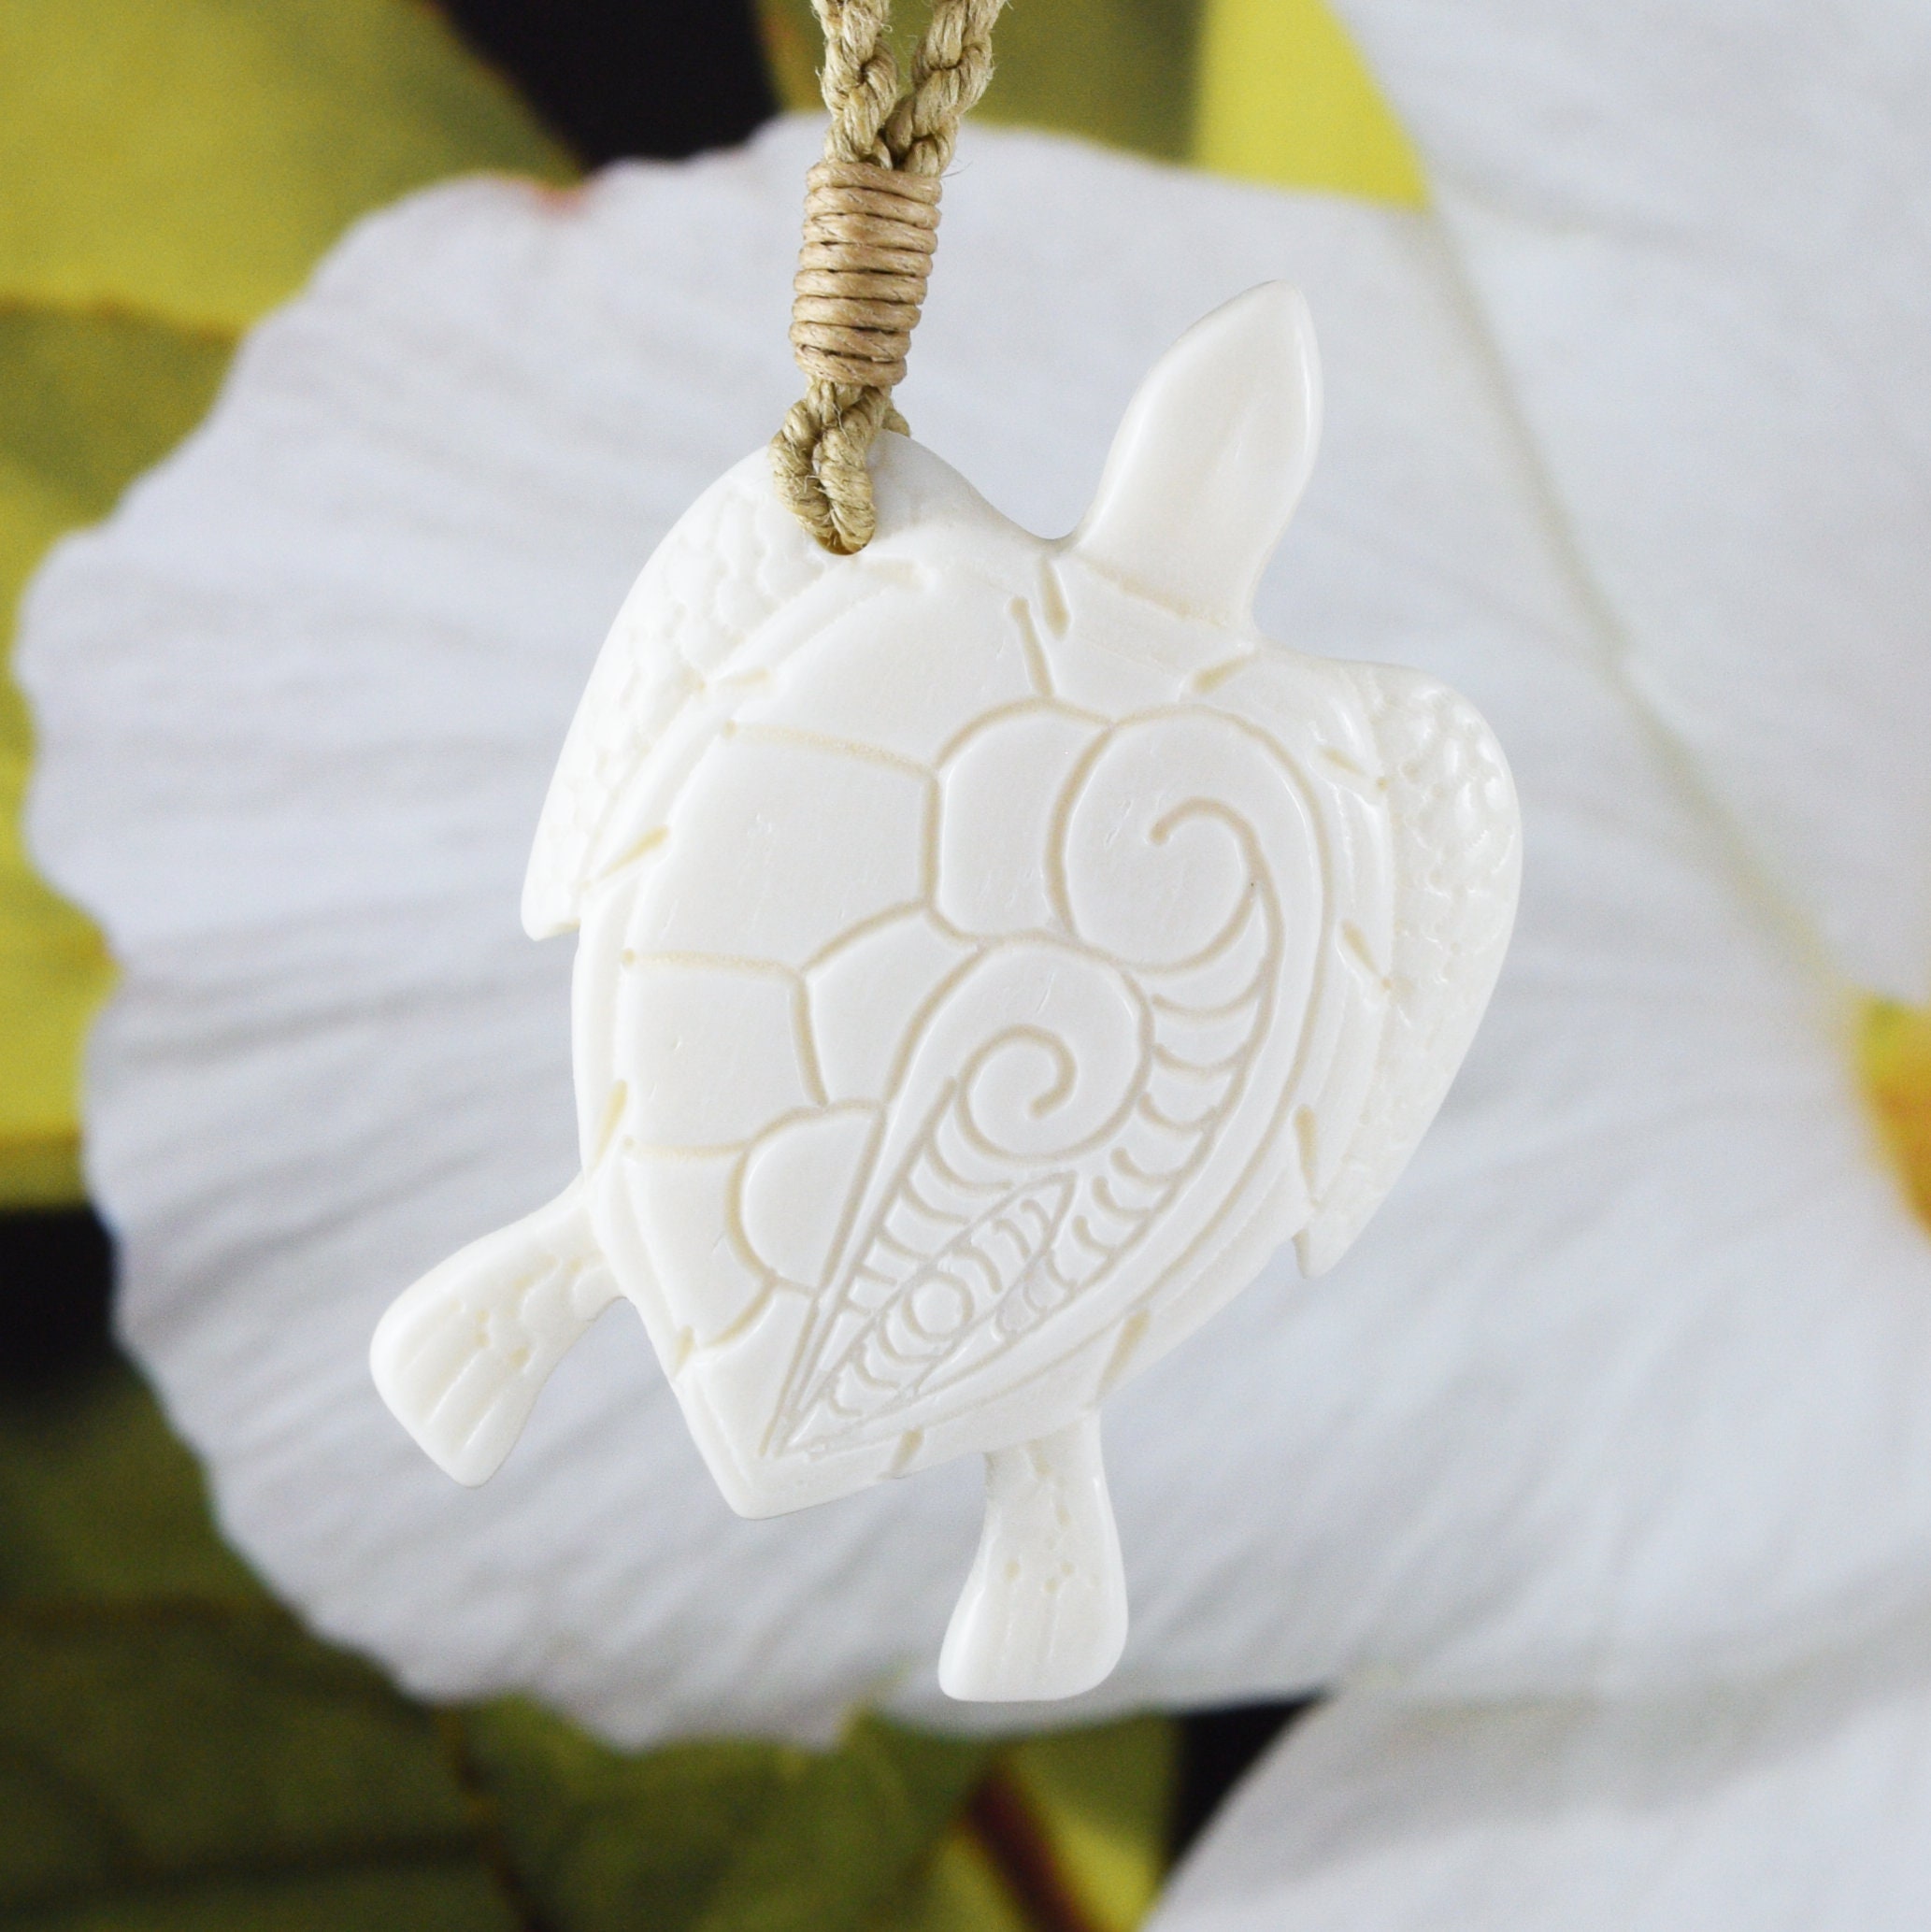 Pirate's Lucky Turtle Pendant – Pirate Clothing Store